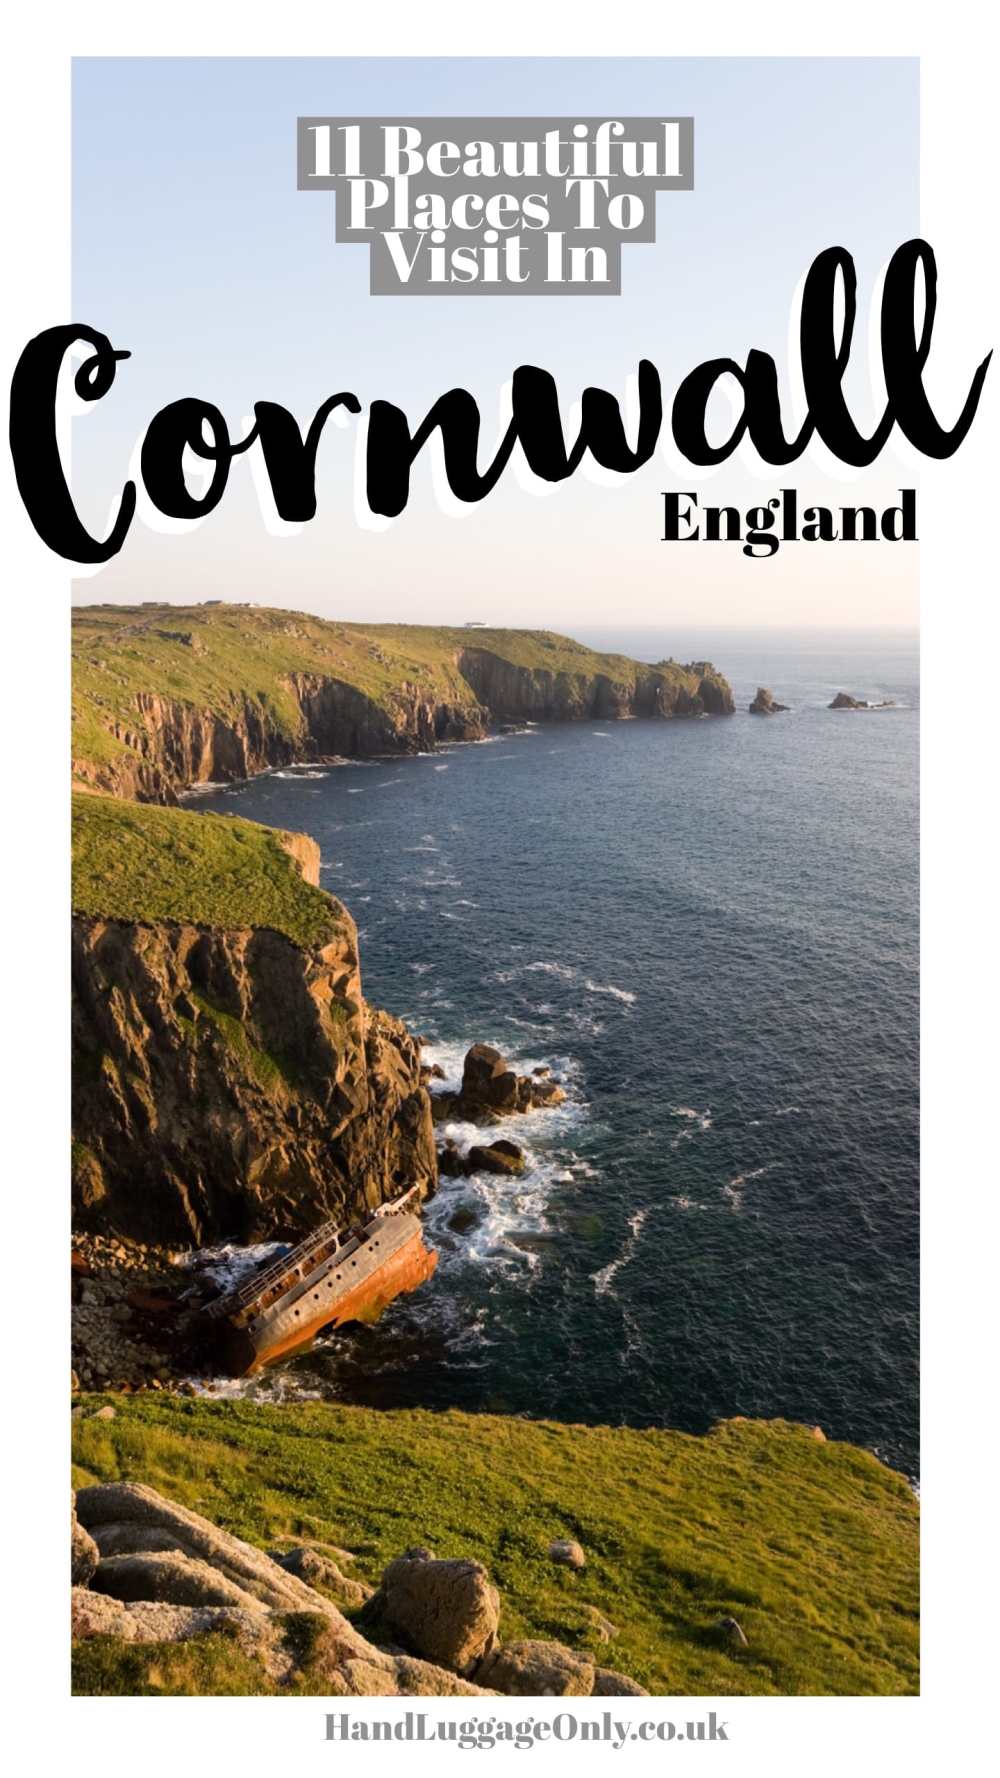 Places To Visit On The The Coast Of Cornwall, England (19)